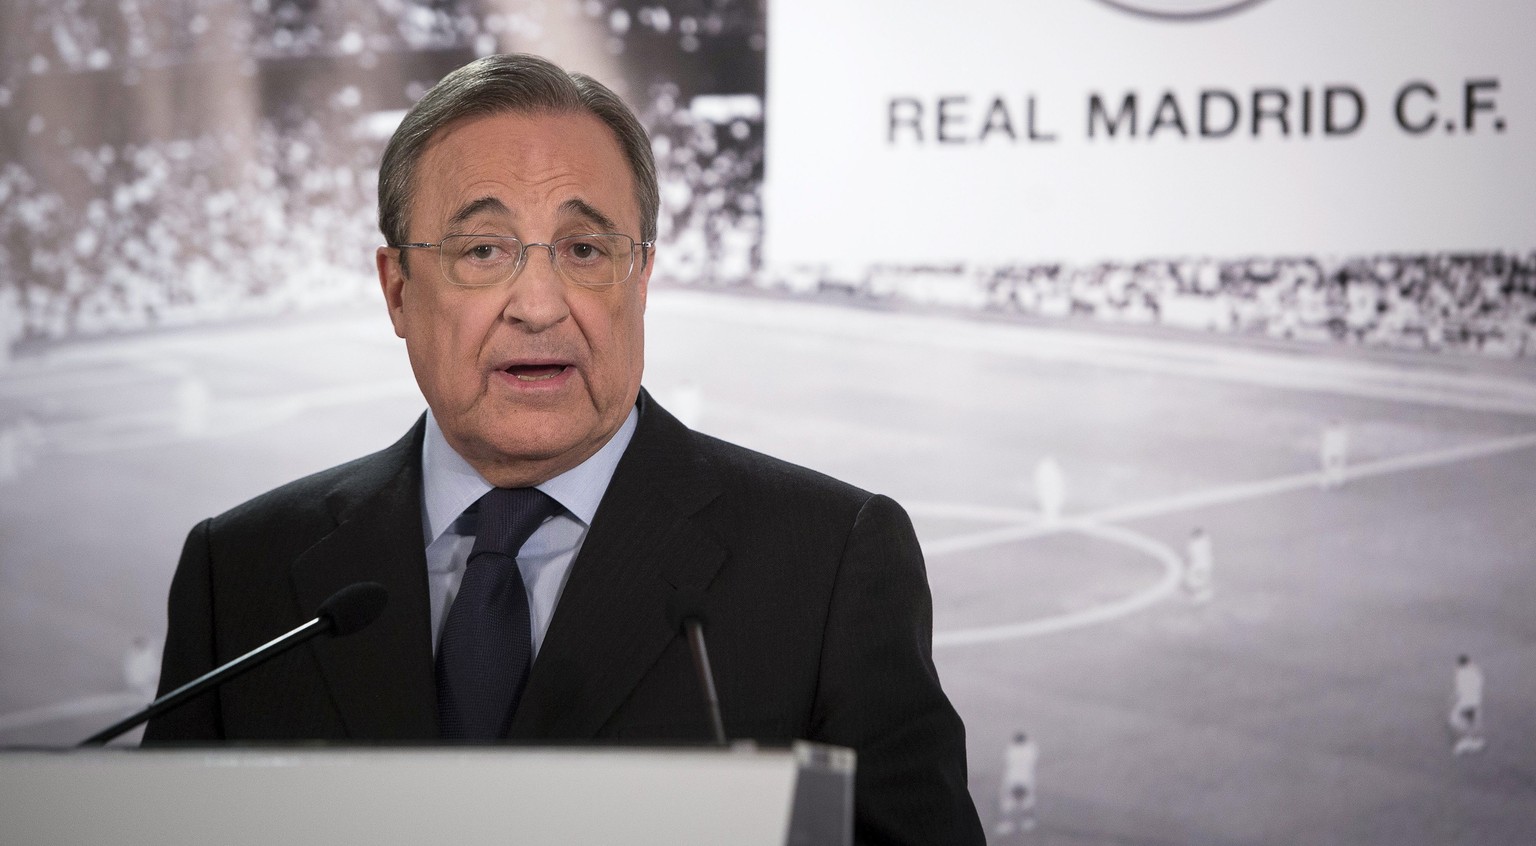 epa05038943 Real Madrid president Florentino Perez speaks during a press conference at Bernabeu stadium in Madrid, Spain, 23 November 2015. Real Madrid&#039;s head coach Rafa Benitez was given a vote  ...